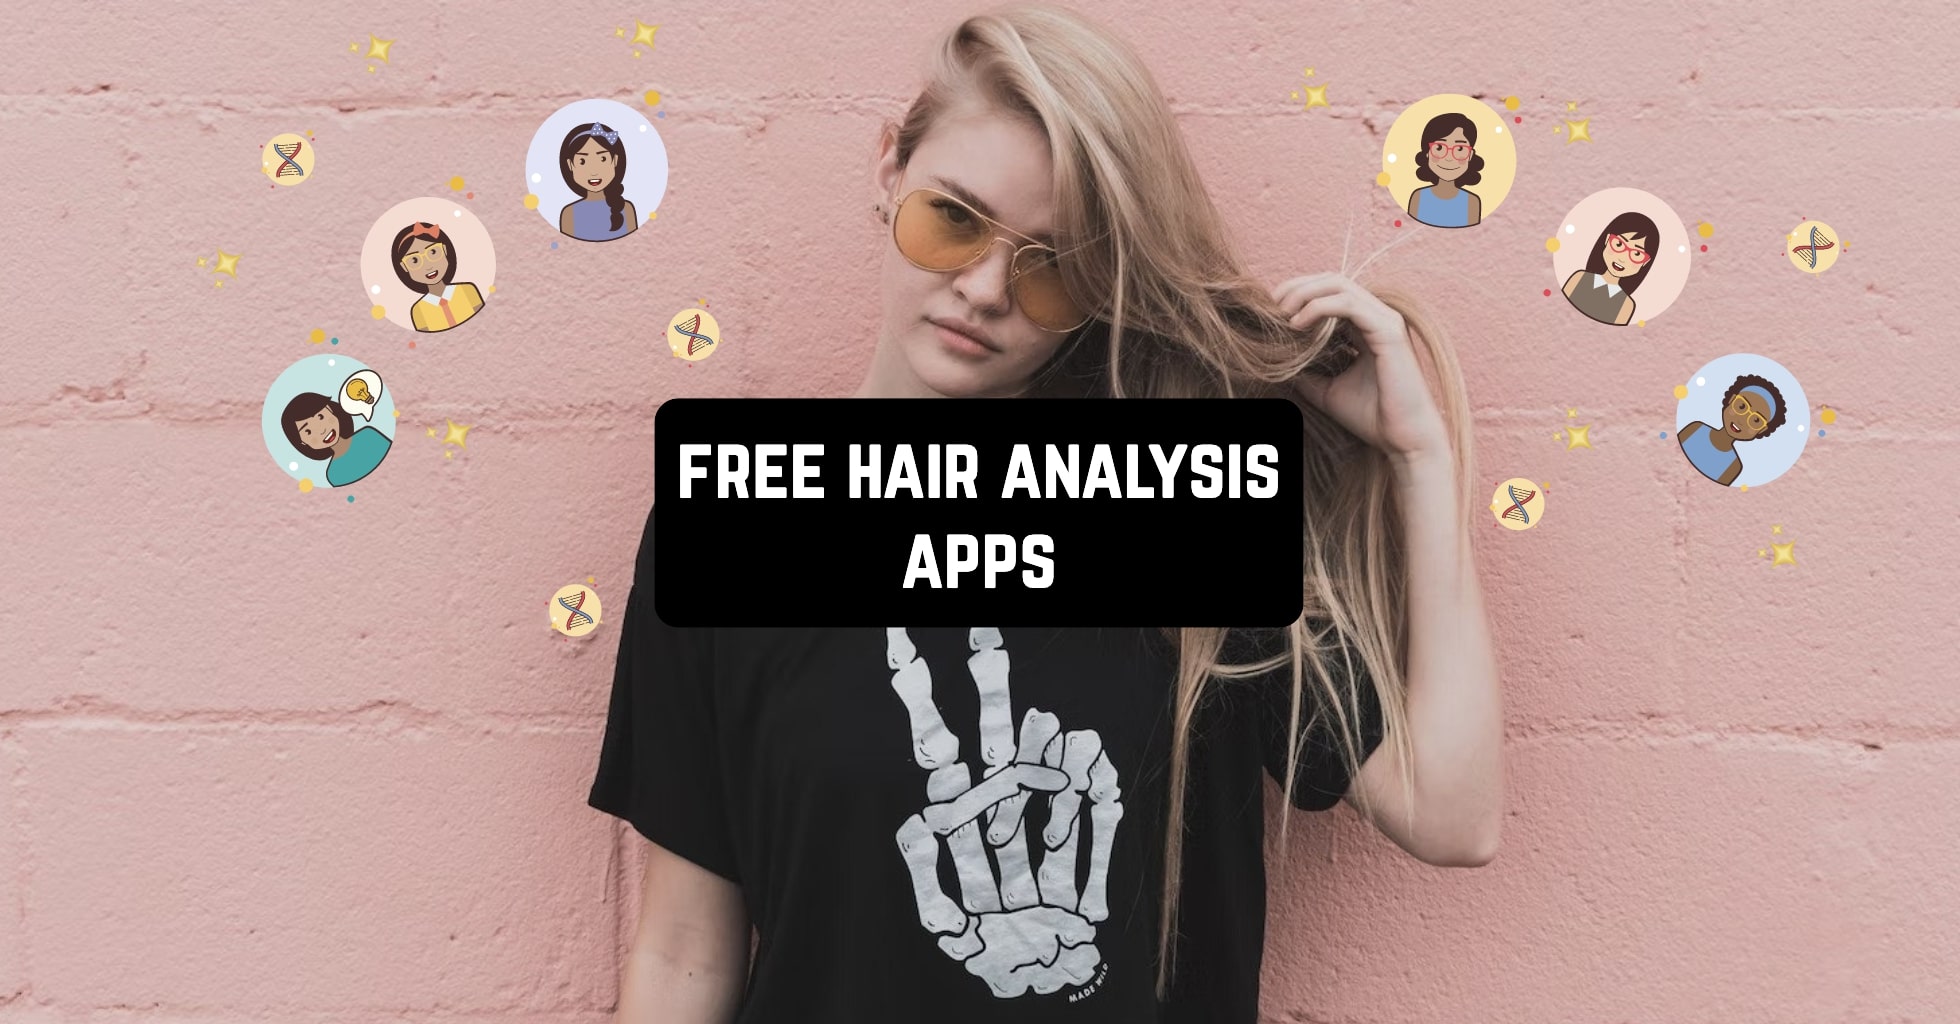 5 Free Hair Analysis Apps for Android & iOS | Free apps for Android and iOS